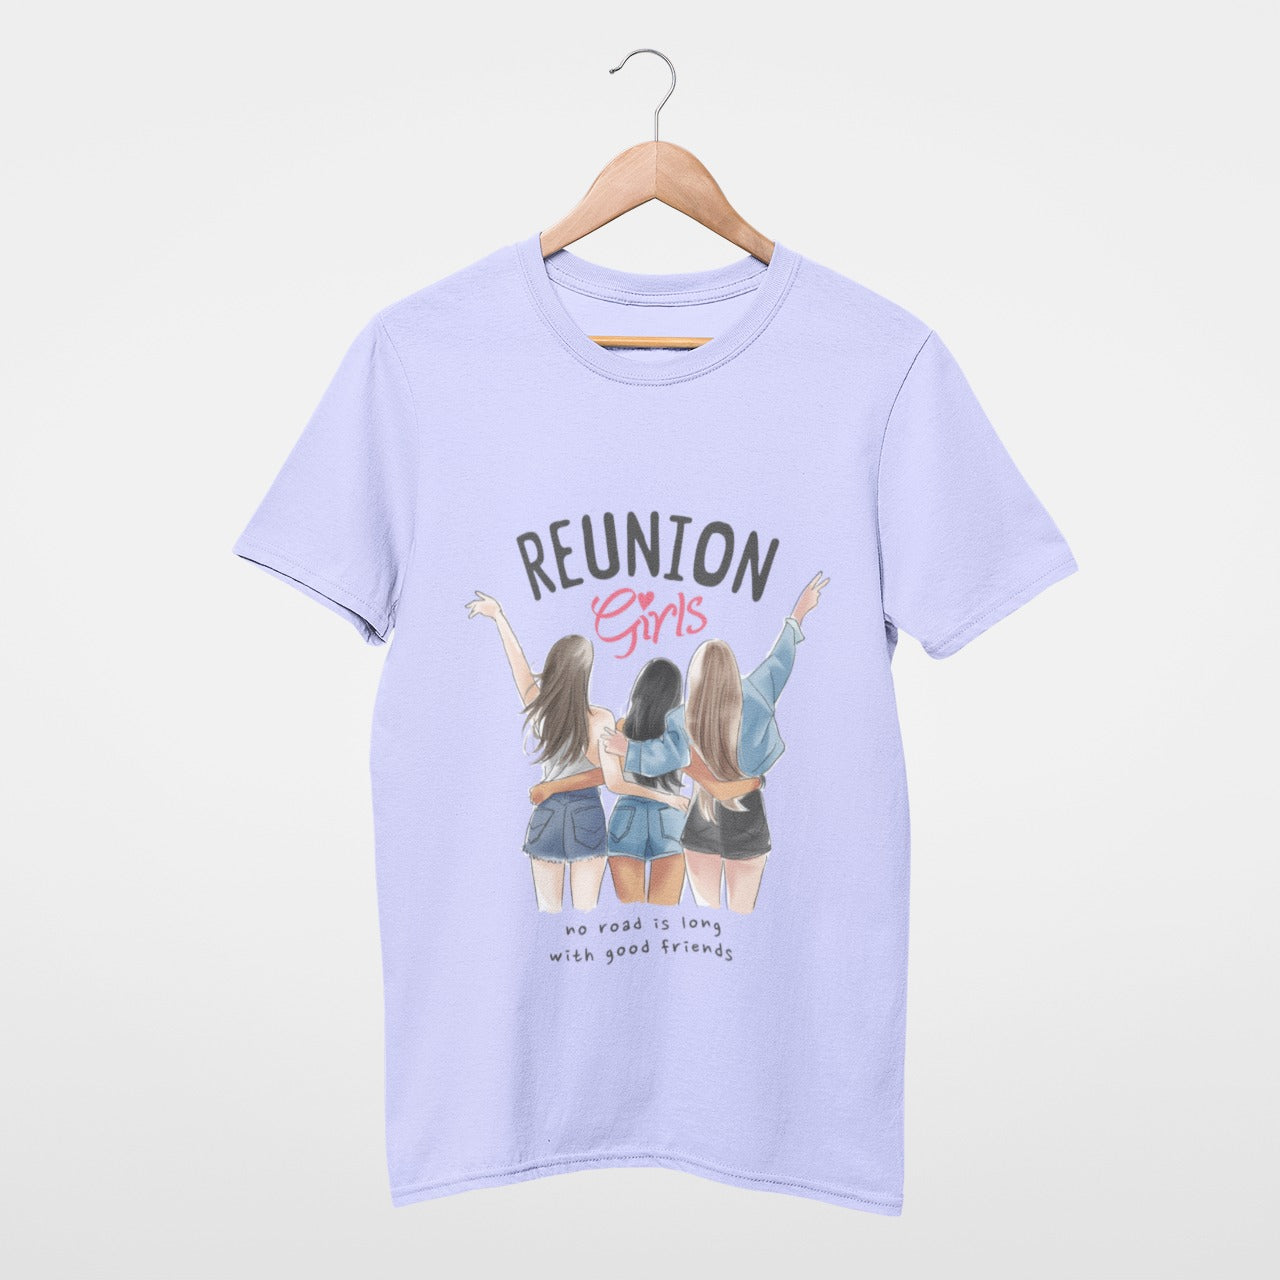 Reunion Girls, no road is long with good friends Tee